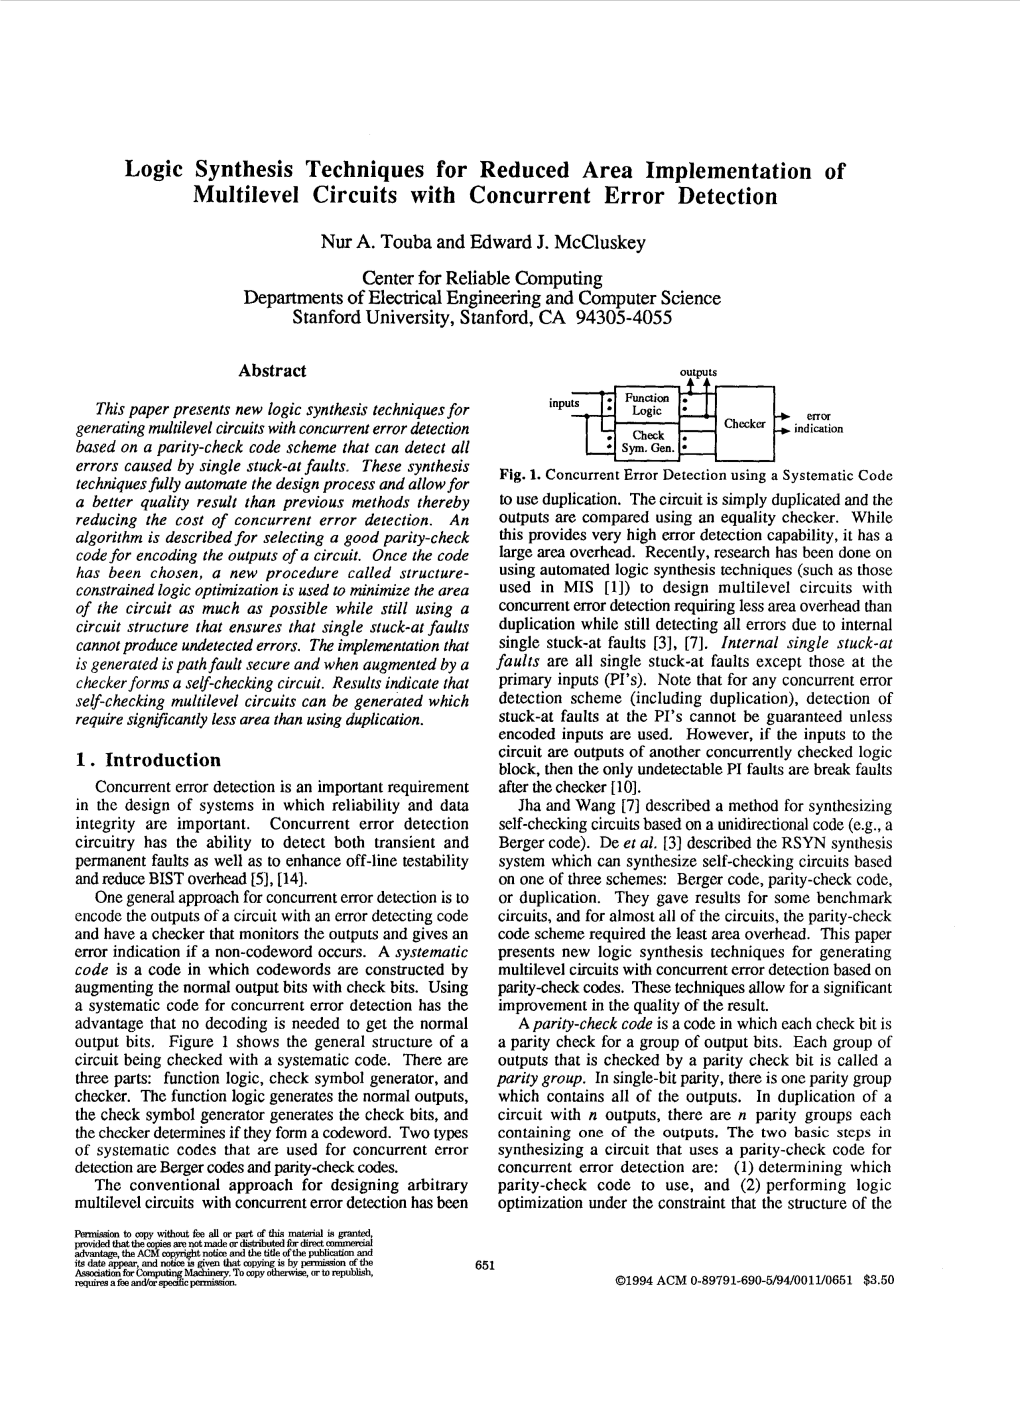 Logic Synthesis Techniques for Reduced Area Implementation of Multilevel Circuits with Concurrent Error Detection